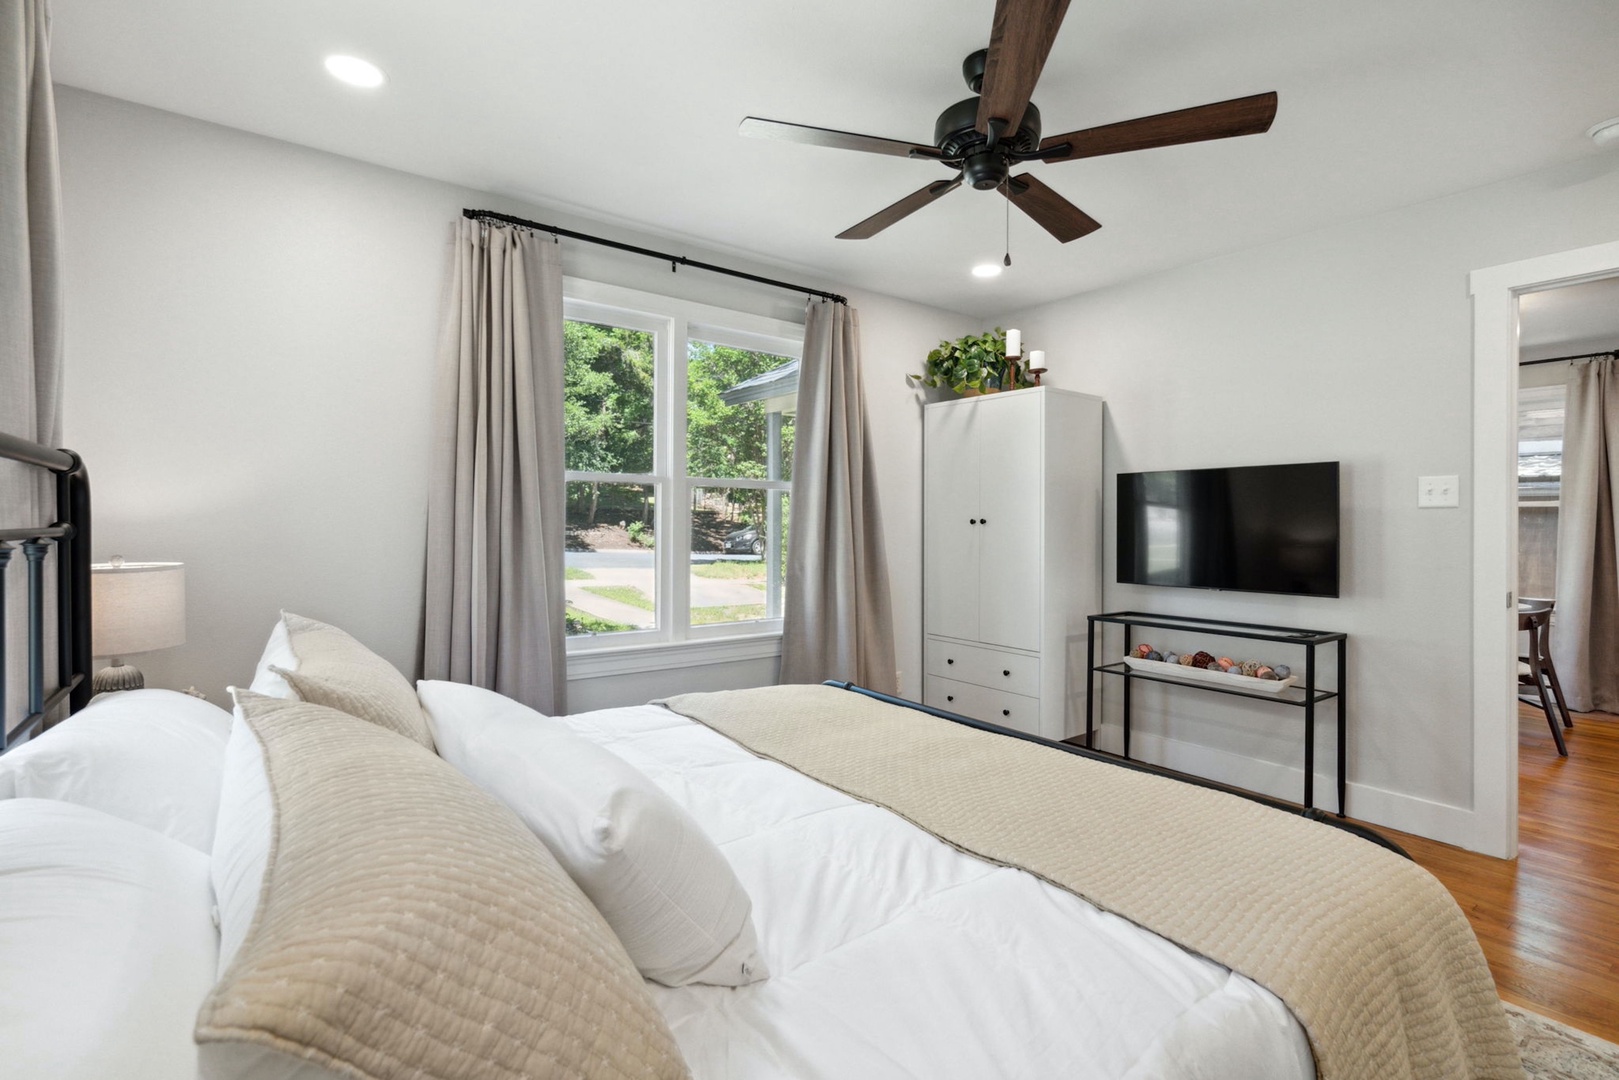 The Guest House’s 2nd bedroom boasts a plush king-sized bed & Smart TV